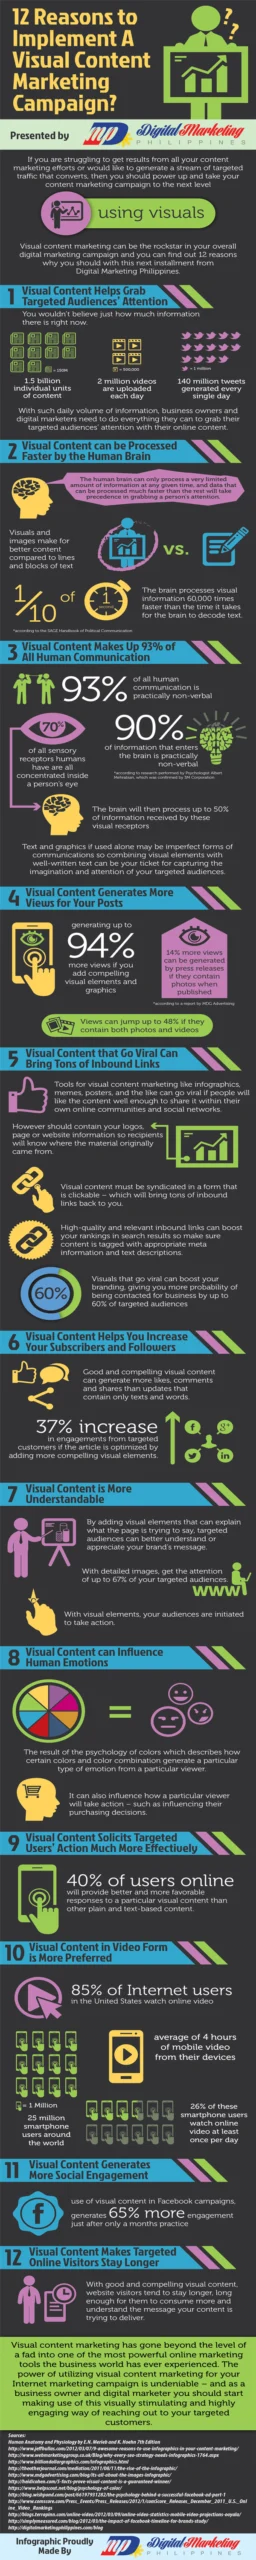 Visual Content Marketing Strategy [InfoGraphic]
